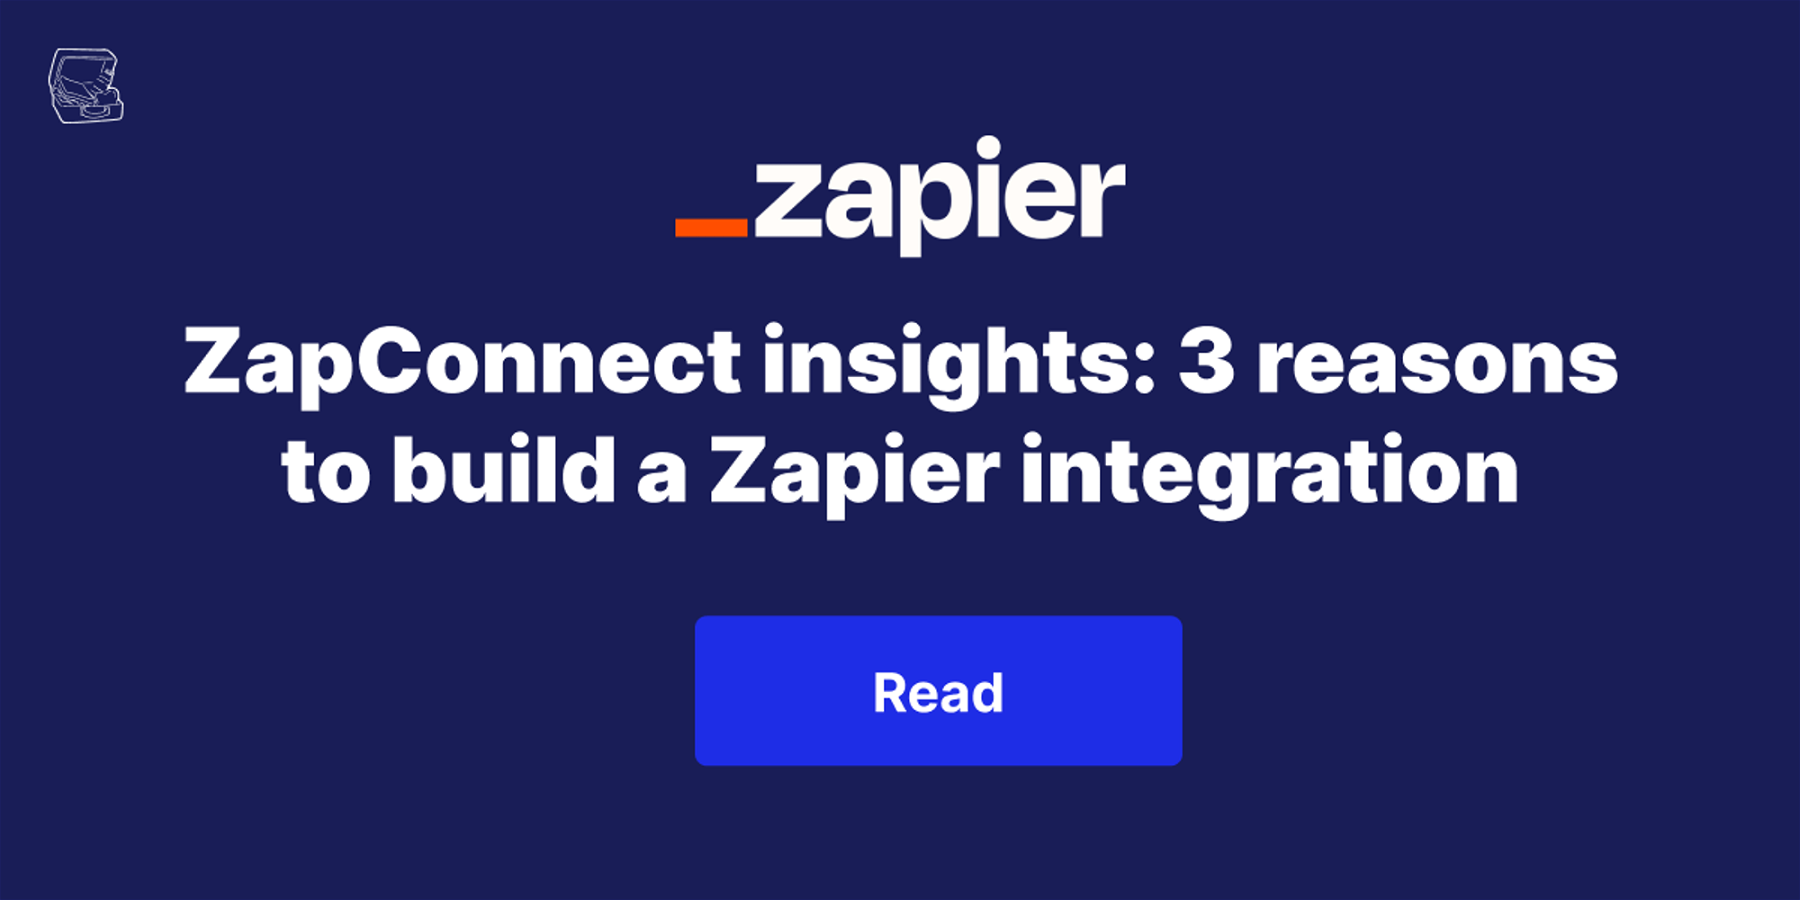 ZapConnect insights: 3 reasons to build a Zapier integration